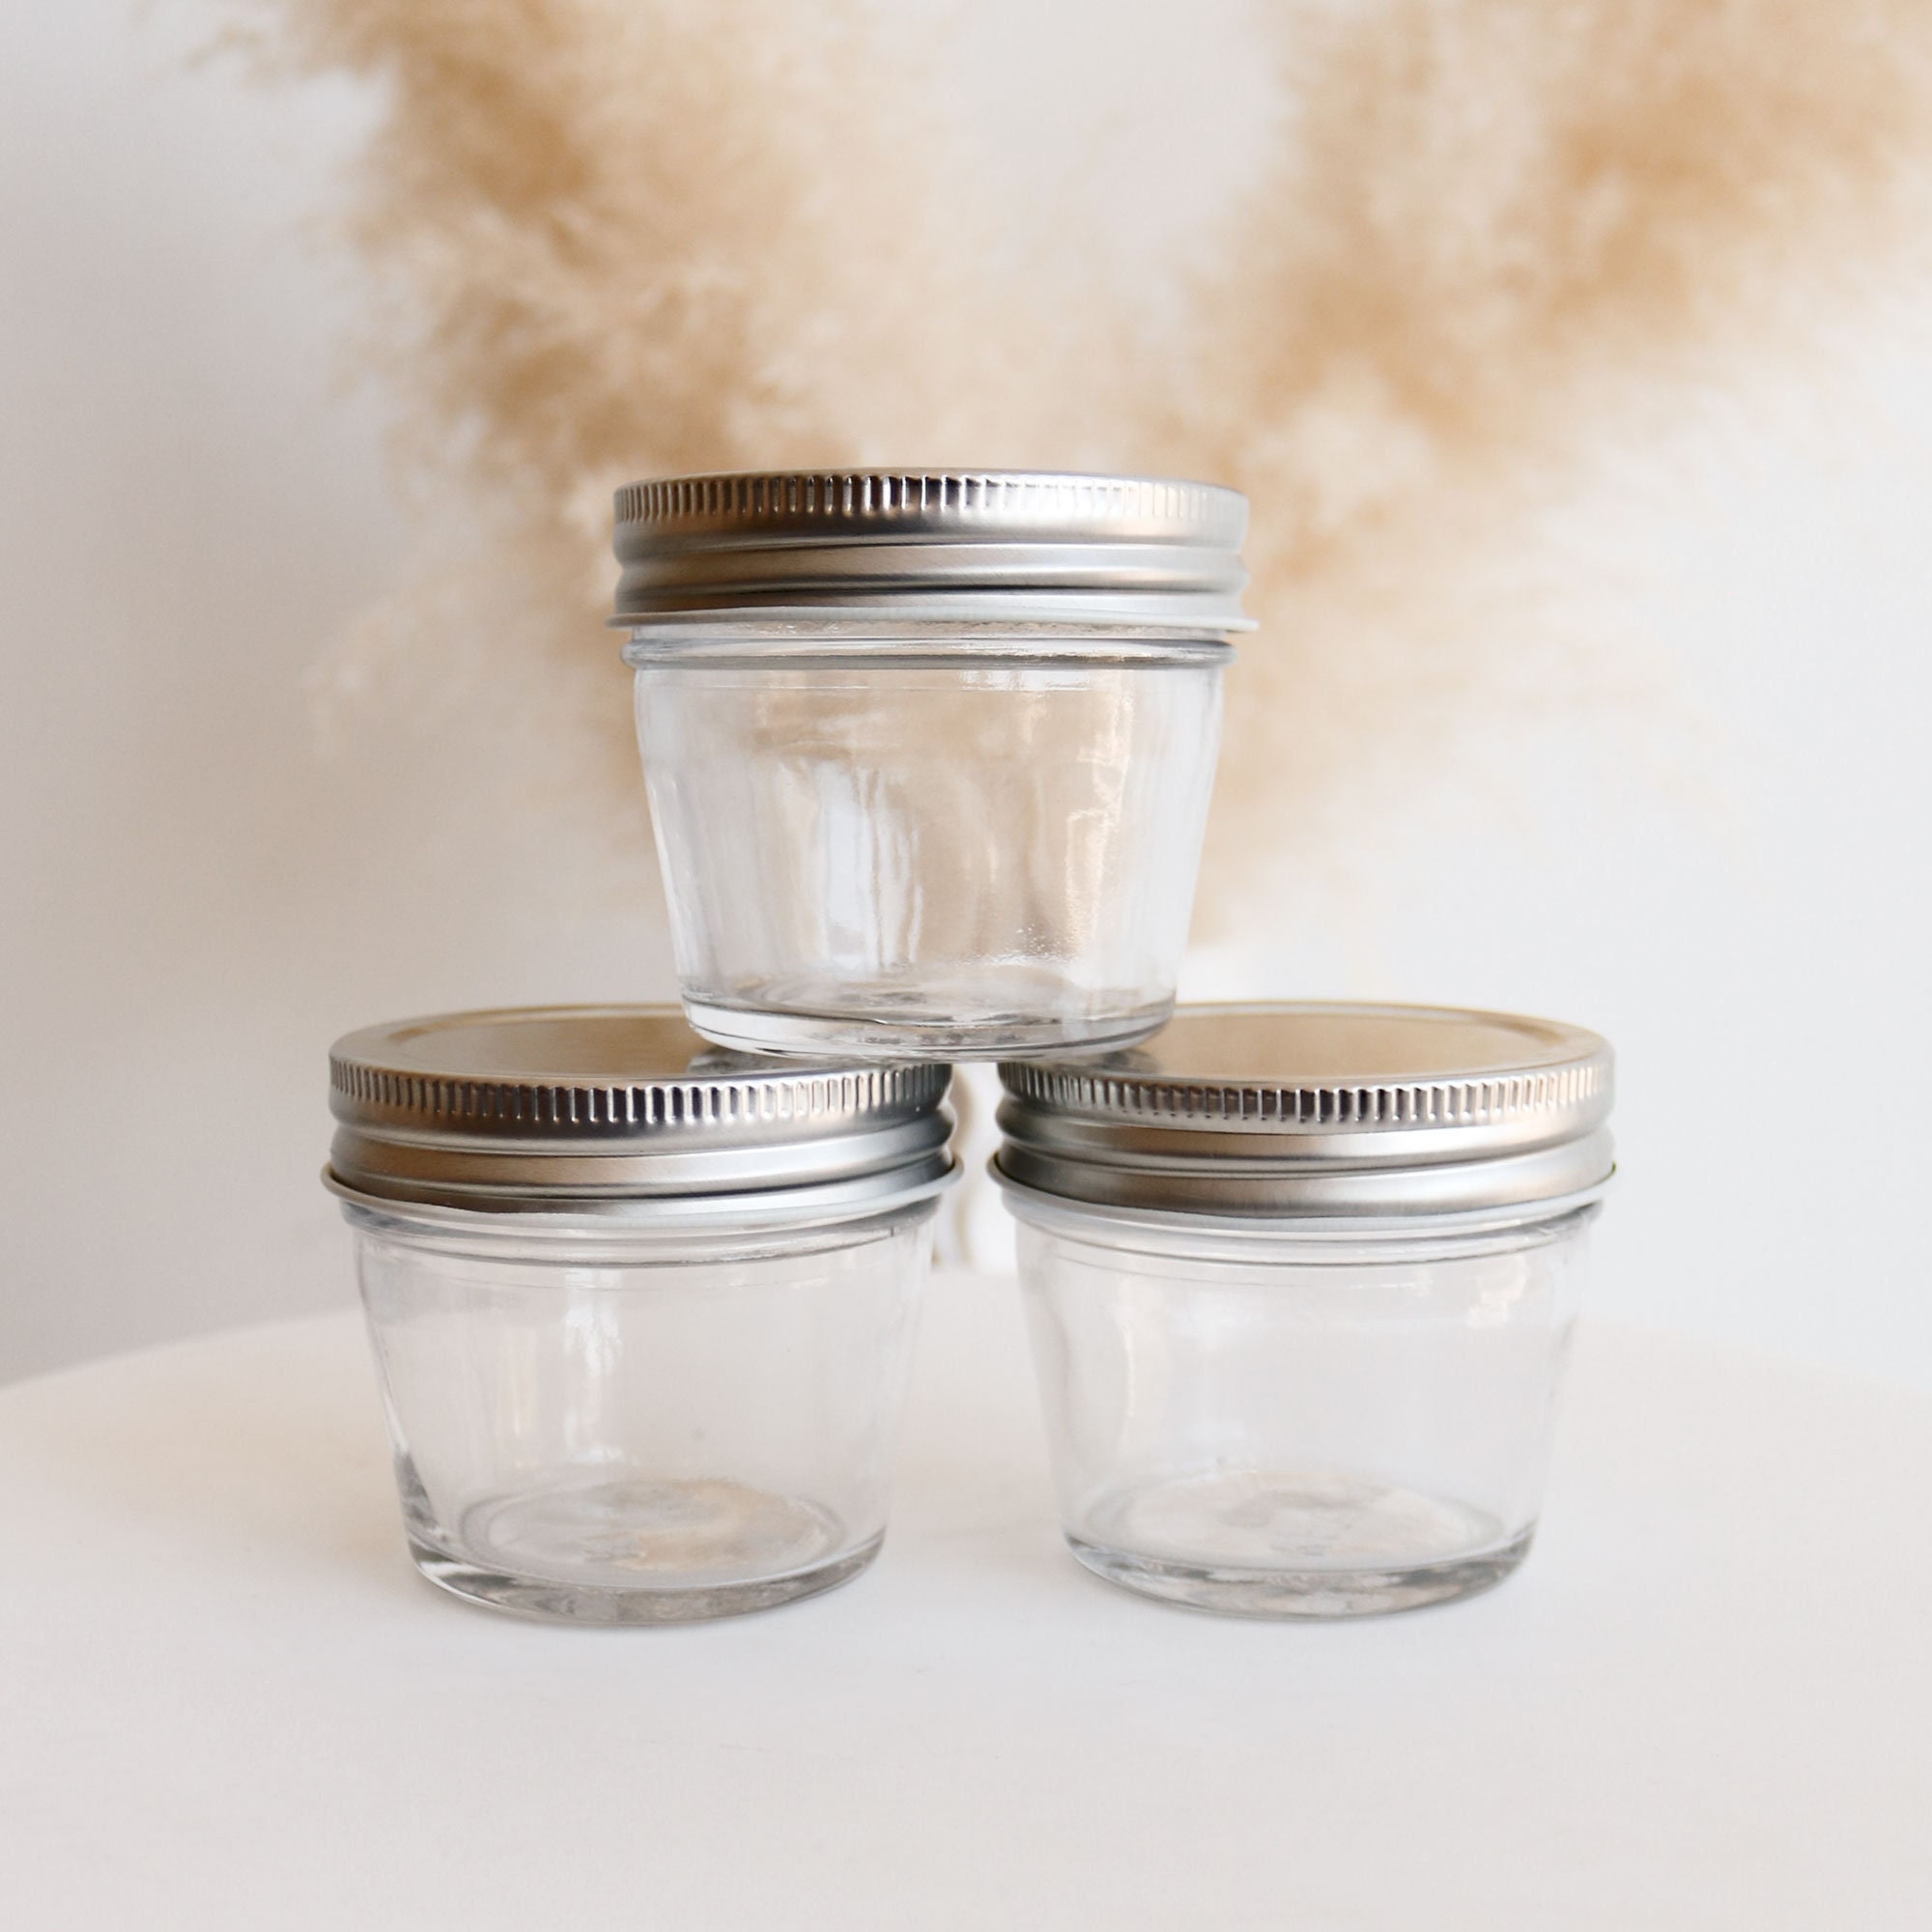 Encheng 4 oz Wide Mouth Mason Jars,Clear Glass Jars with Lids